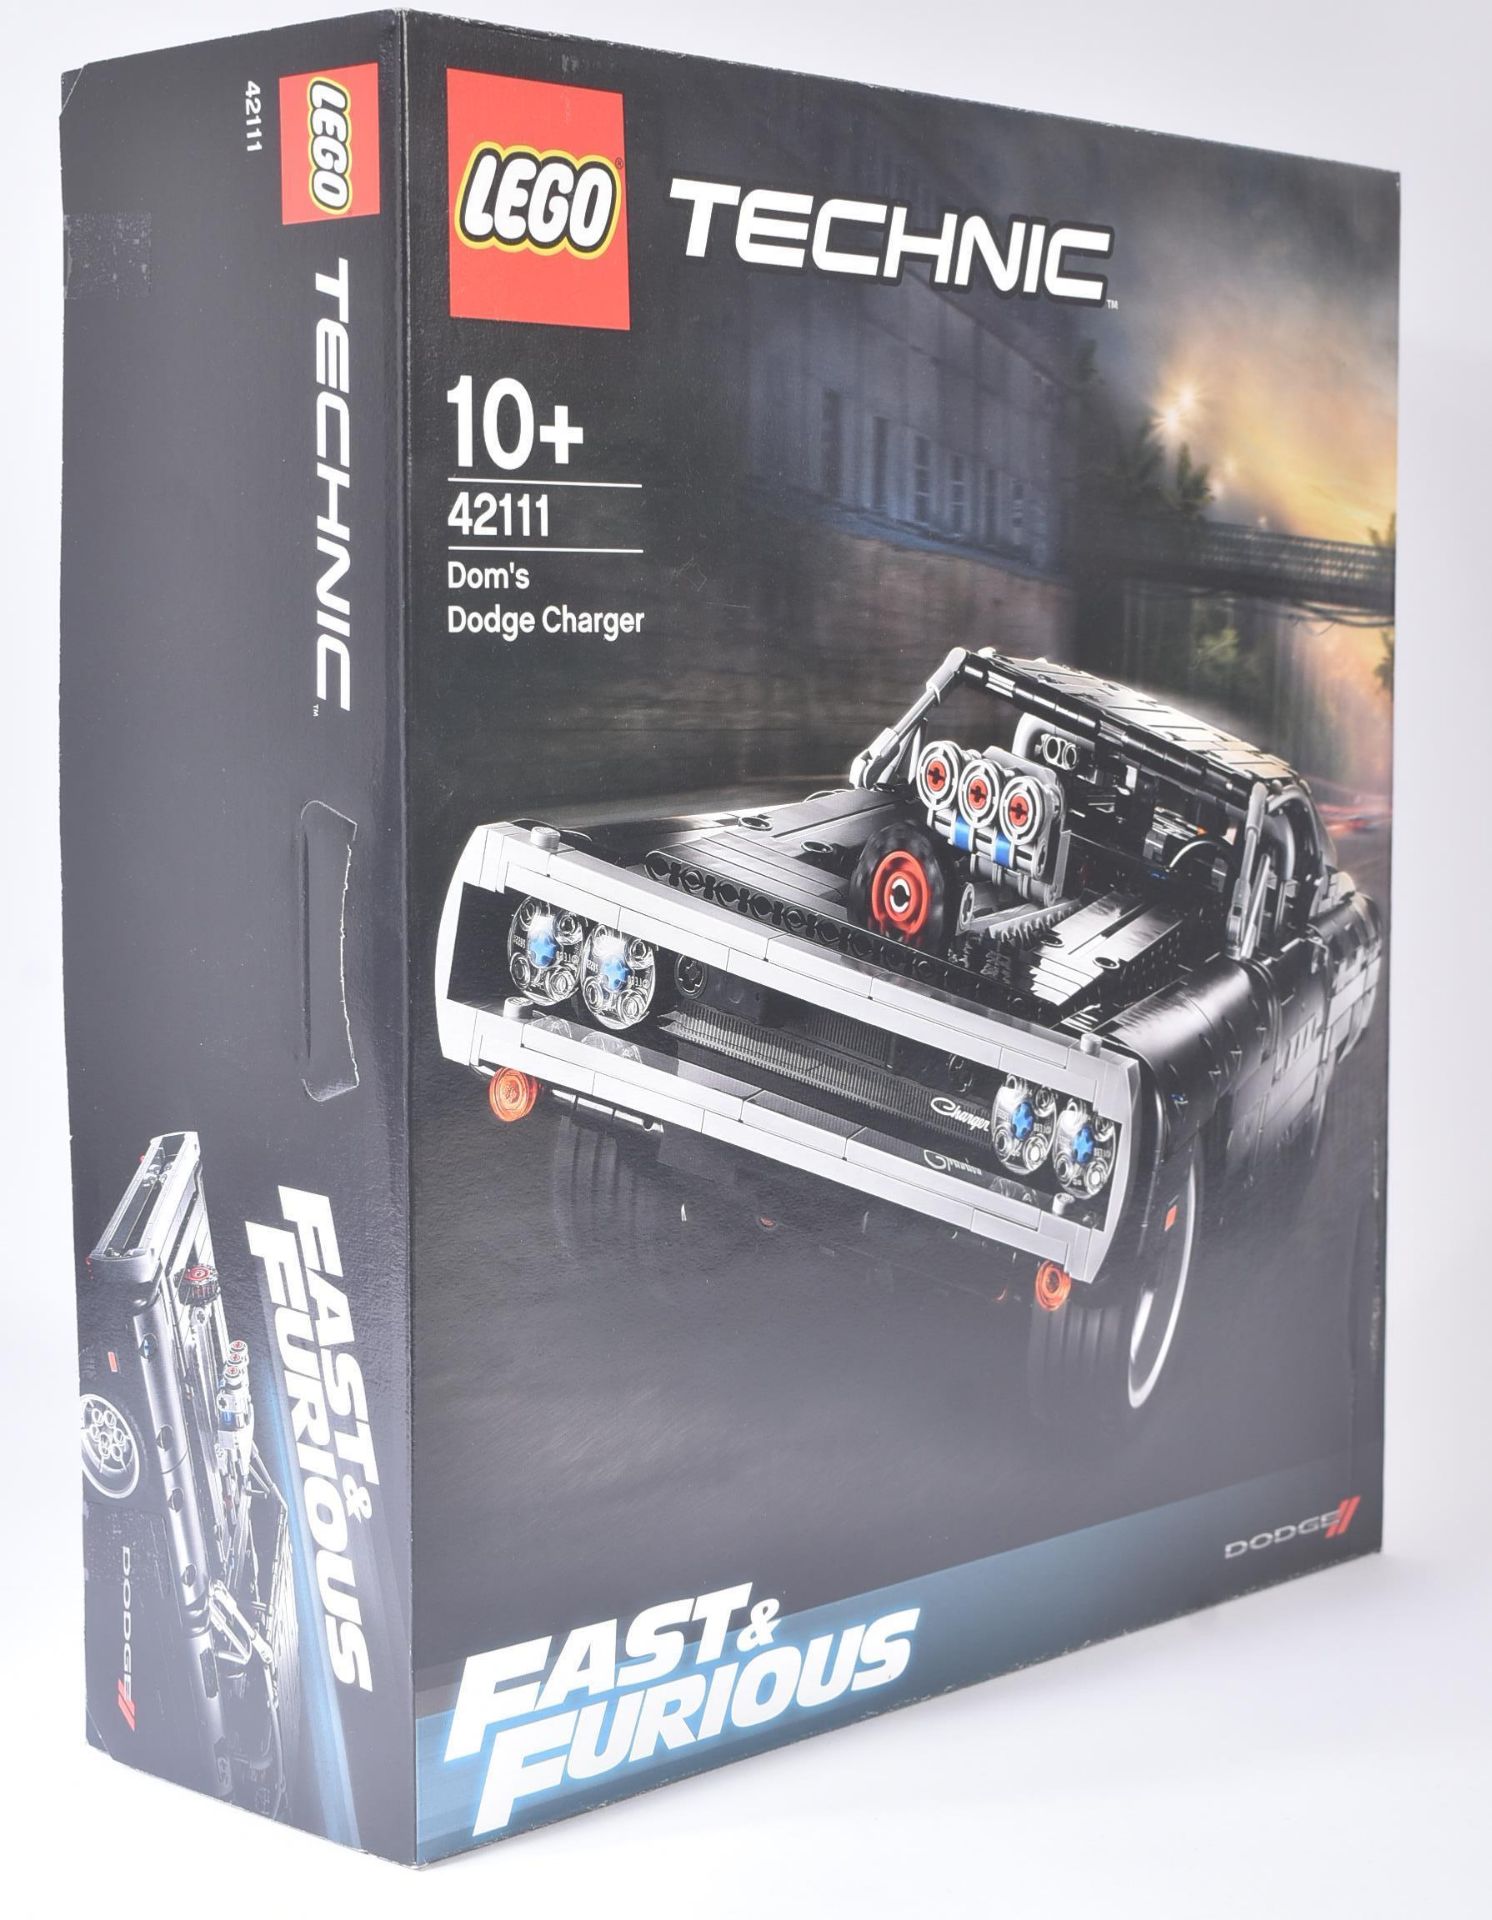 LEGO SET - LEGO TECHNIC - 42111 - FAST & FURIOUS DOM'S DODGE CHARGER - Image 2 of 10